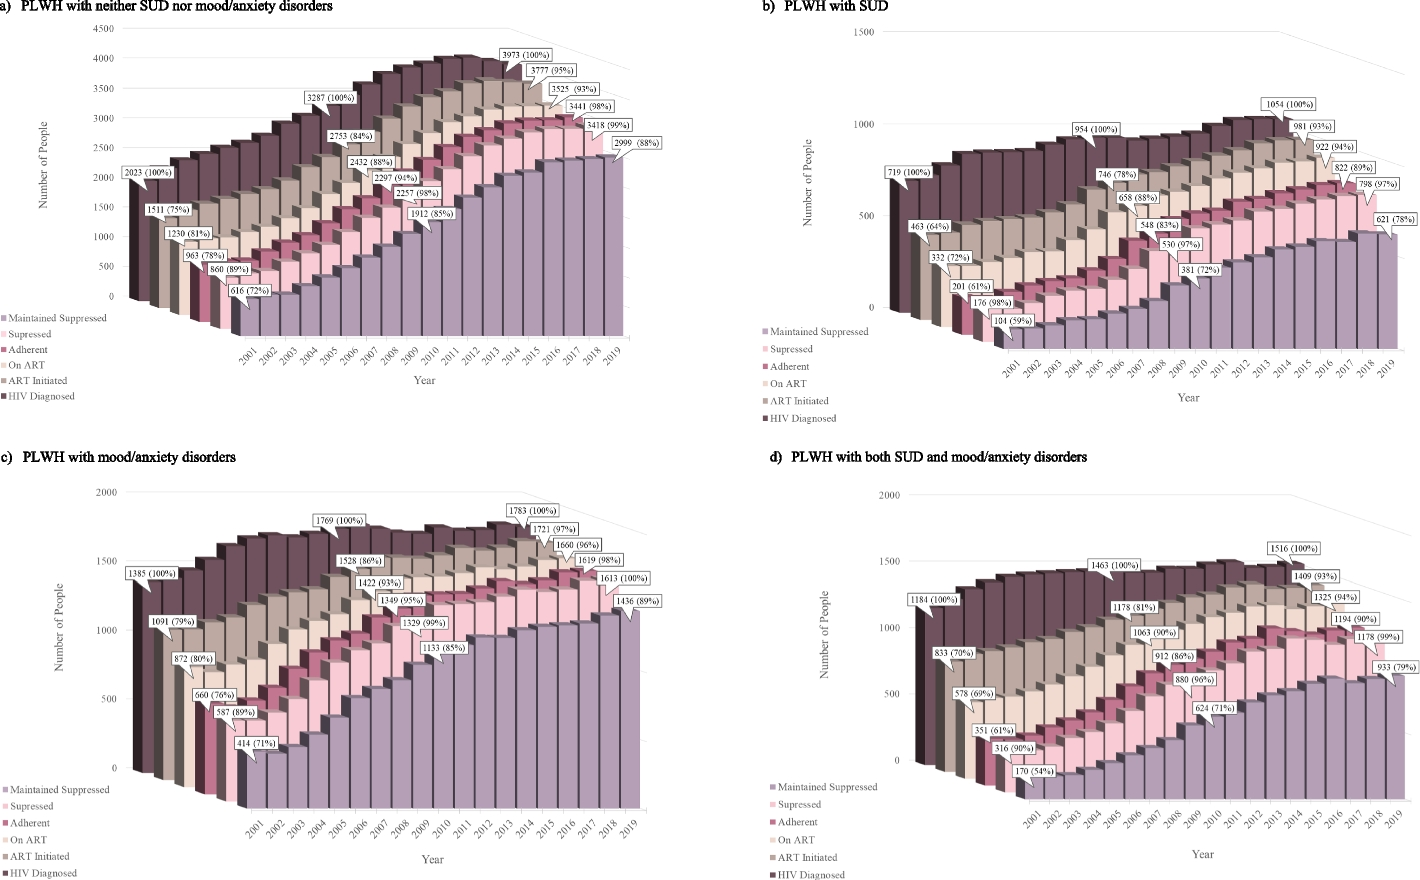 Impact of Substance Use and Mood/Anxiety Disorders on the HIV Continuum of Care in British Columbia, Canada, from 2001 to 2019